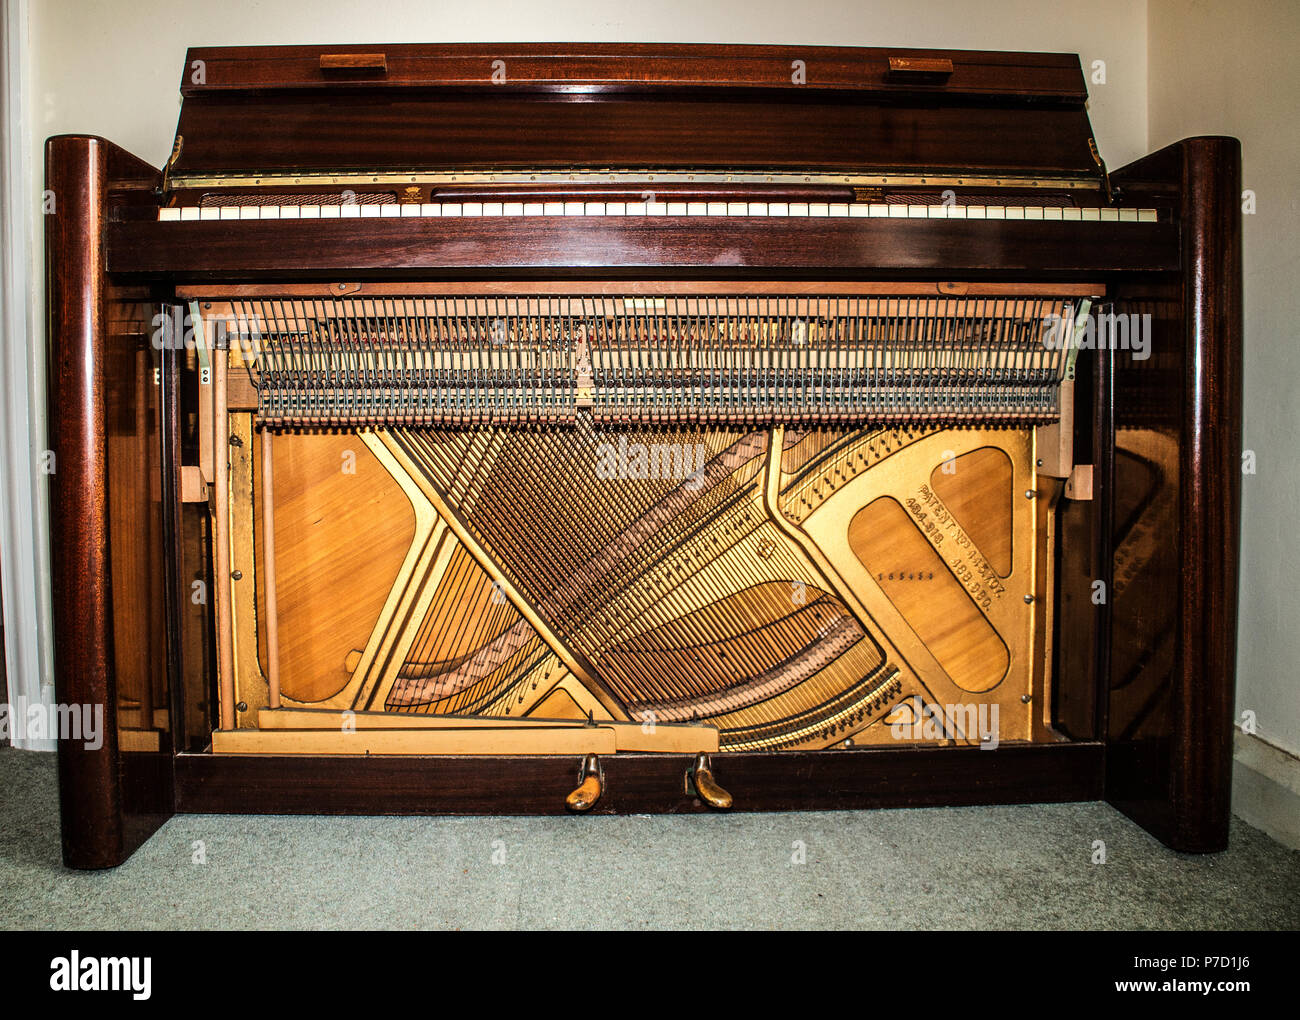 View of soundboard,wires and mechanism (front panel removed) of a 1950s dark mahogany Eavestaff  Pianette 'Minipiano'. Stock Photo